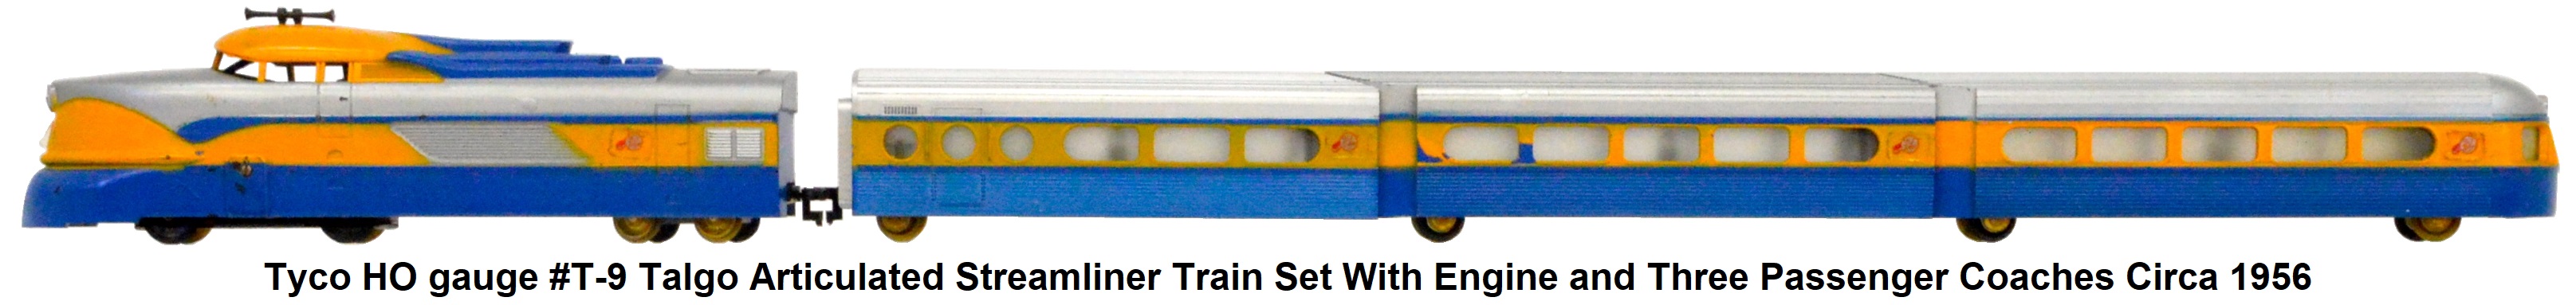 Tyco HO gauge #T-9 Talgo Articulated Streamliner Train Set with Engine and 3 passenger coaches circa 1956